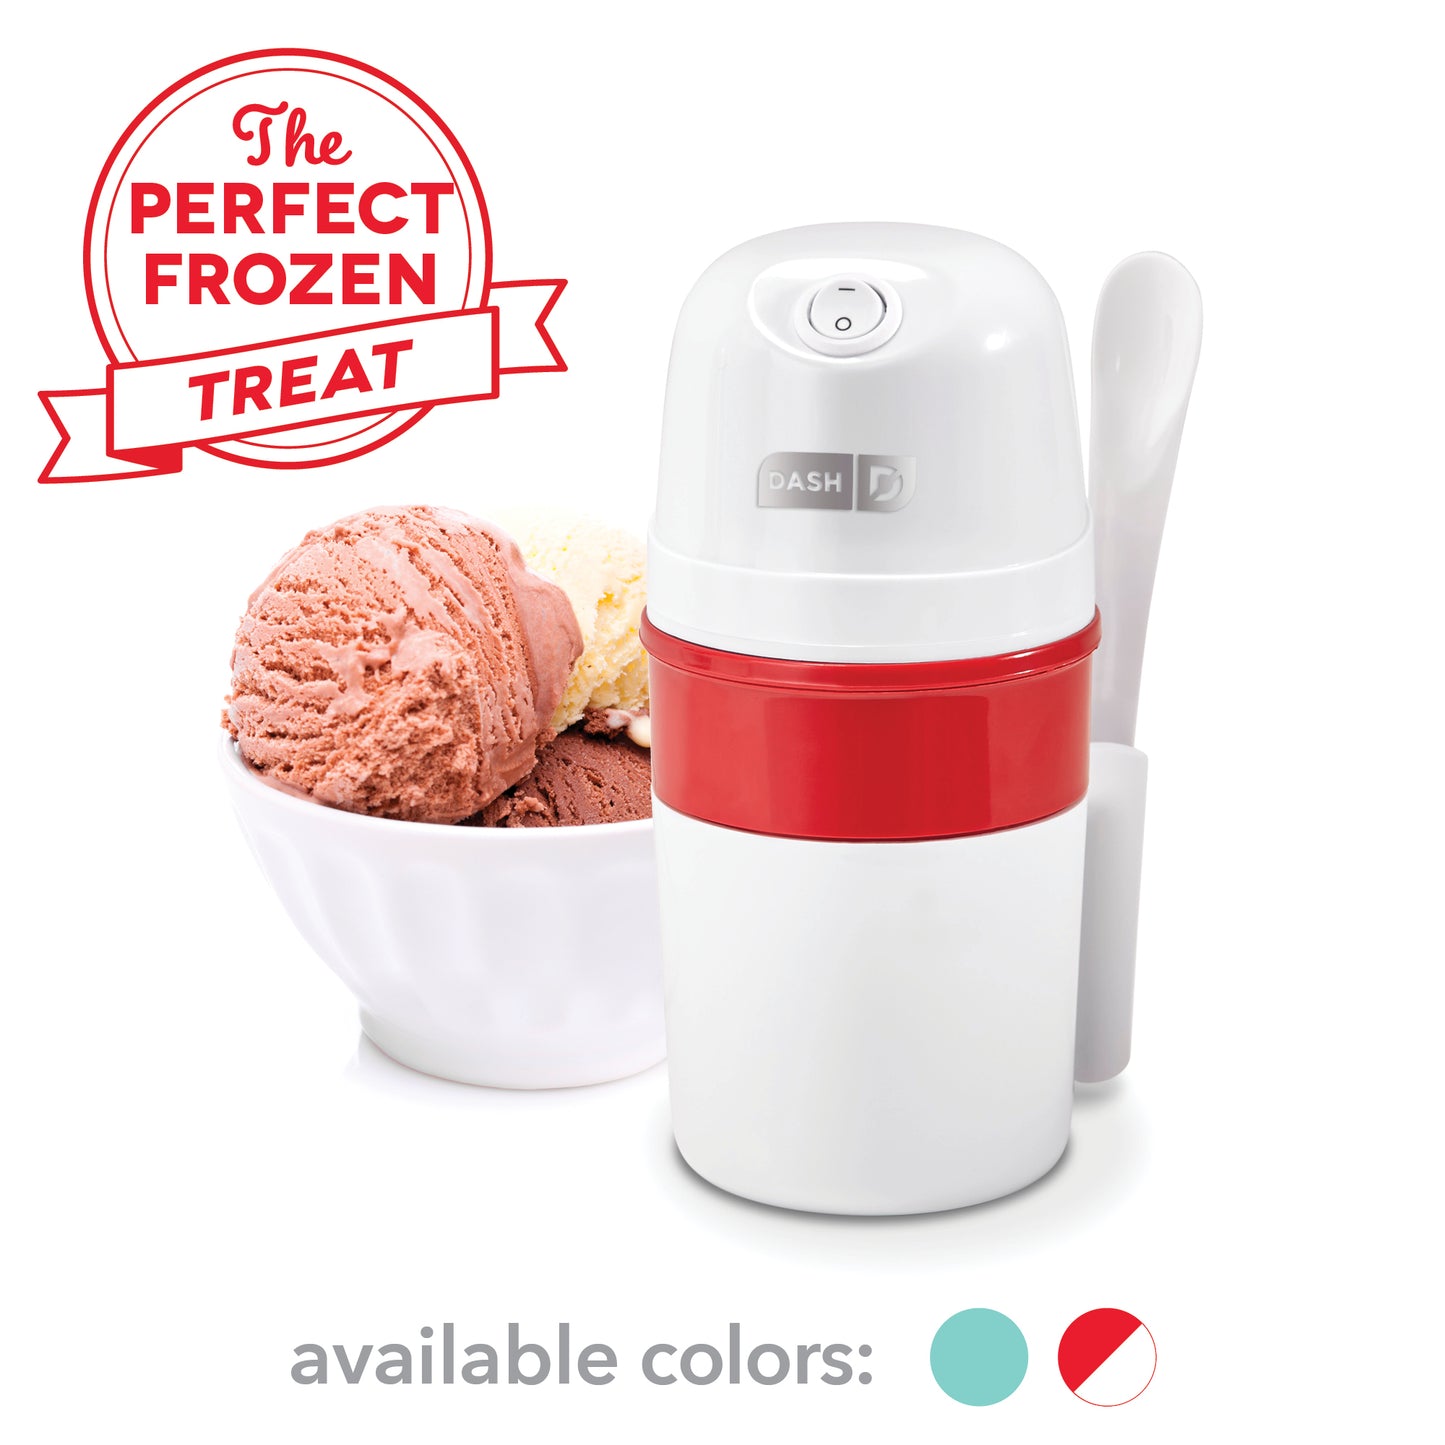 Rise by Dash Personal Ice Cream Maker 